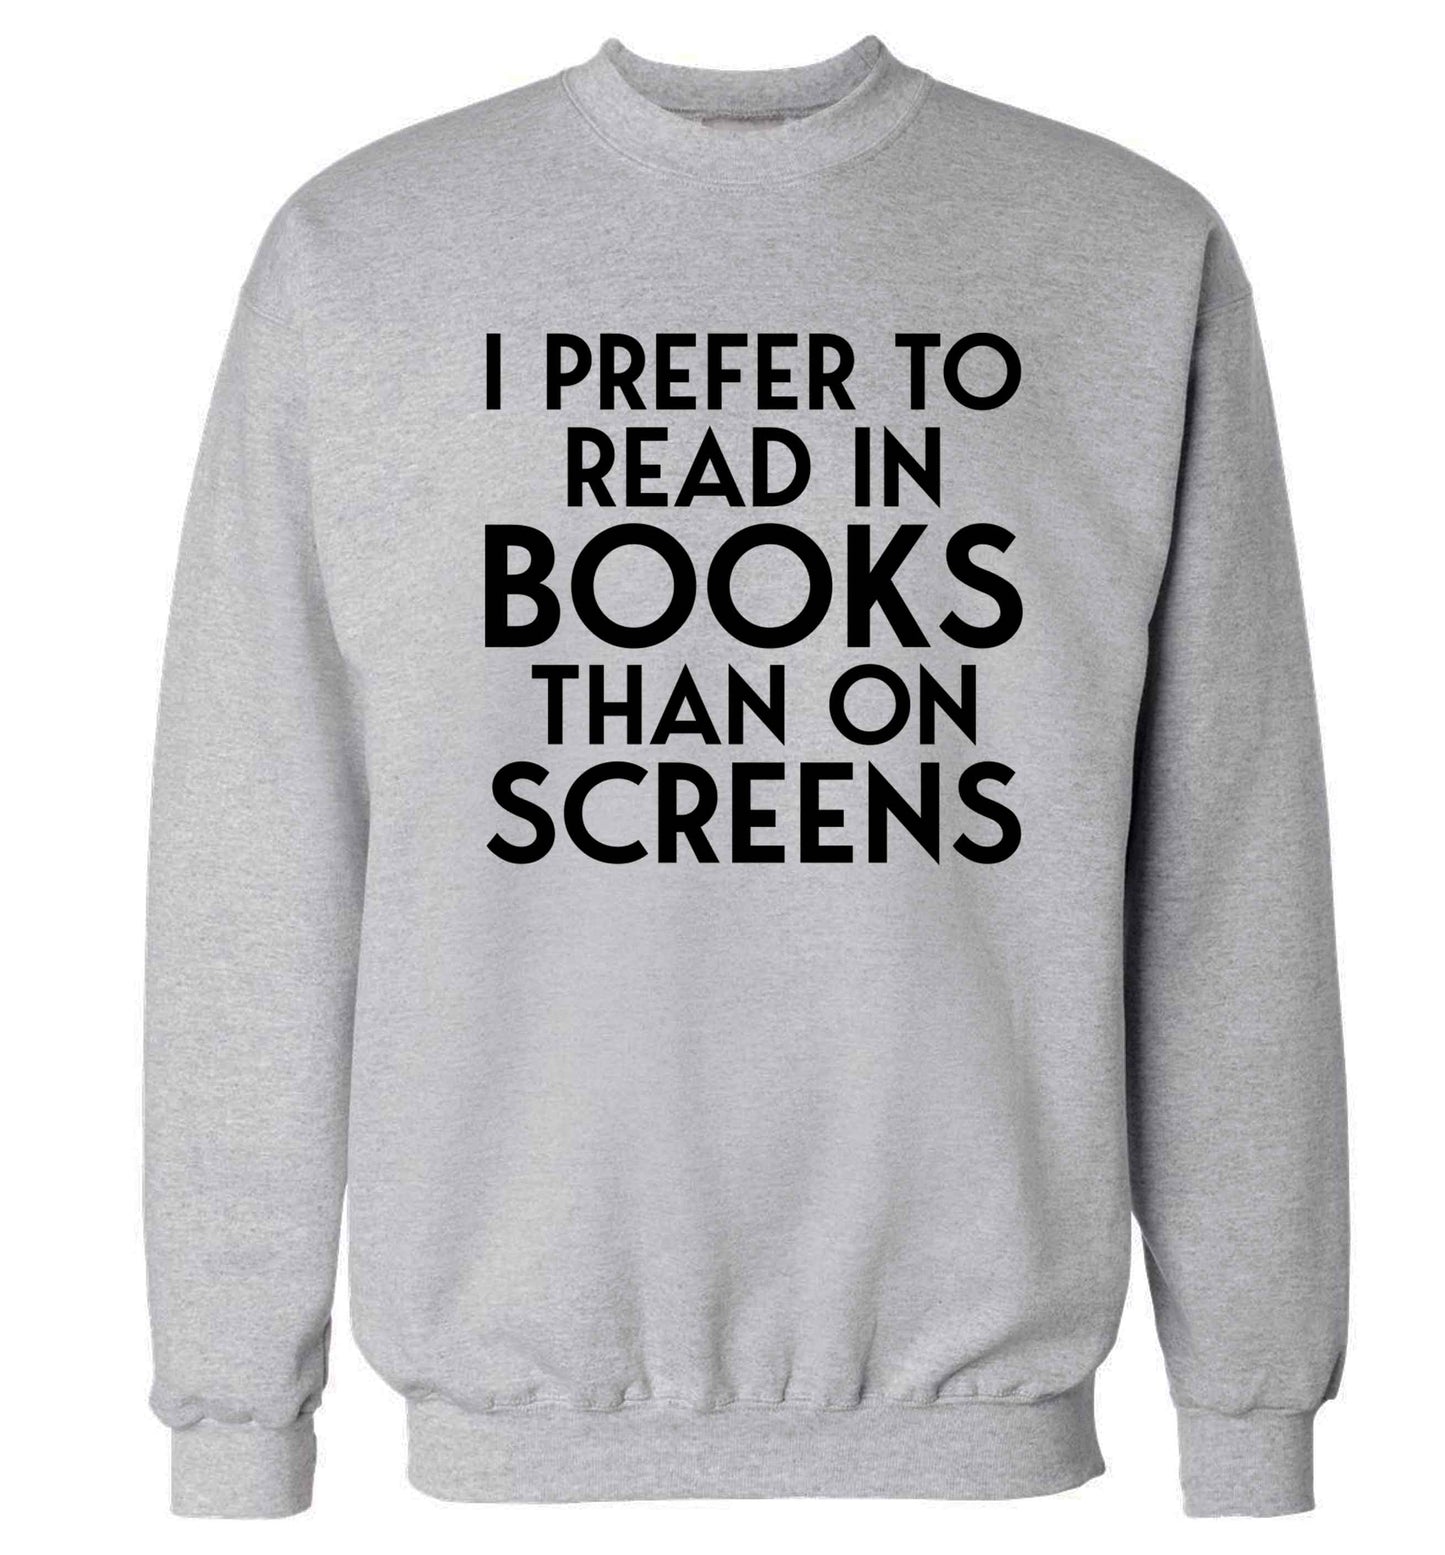 I prefer to read in books than on screens Adult's unisex grey Sweater 2XL